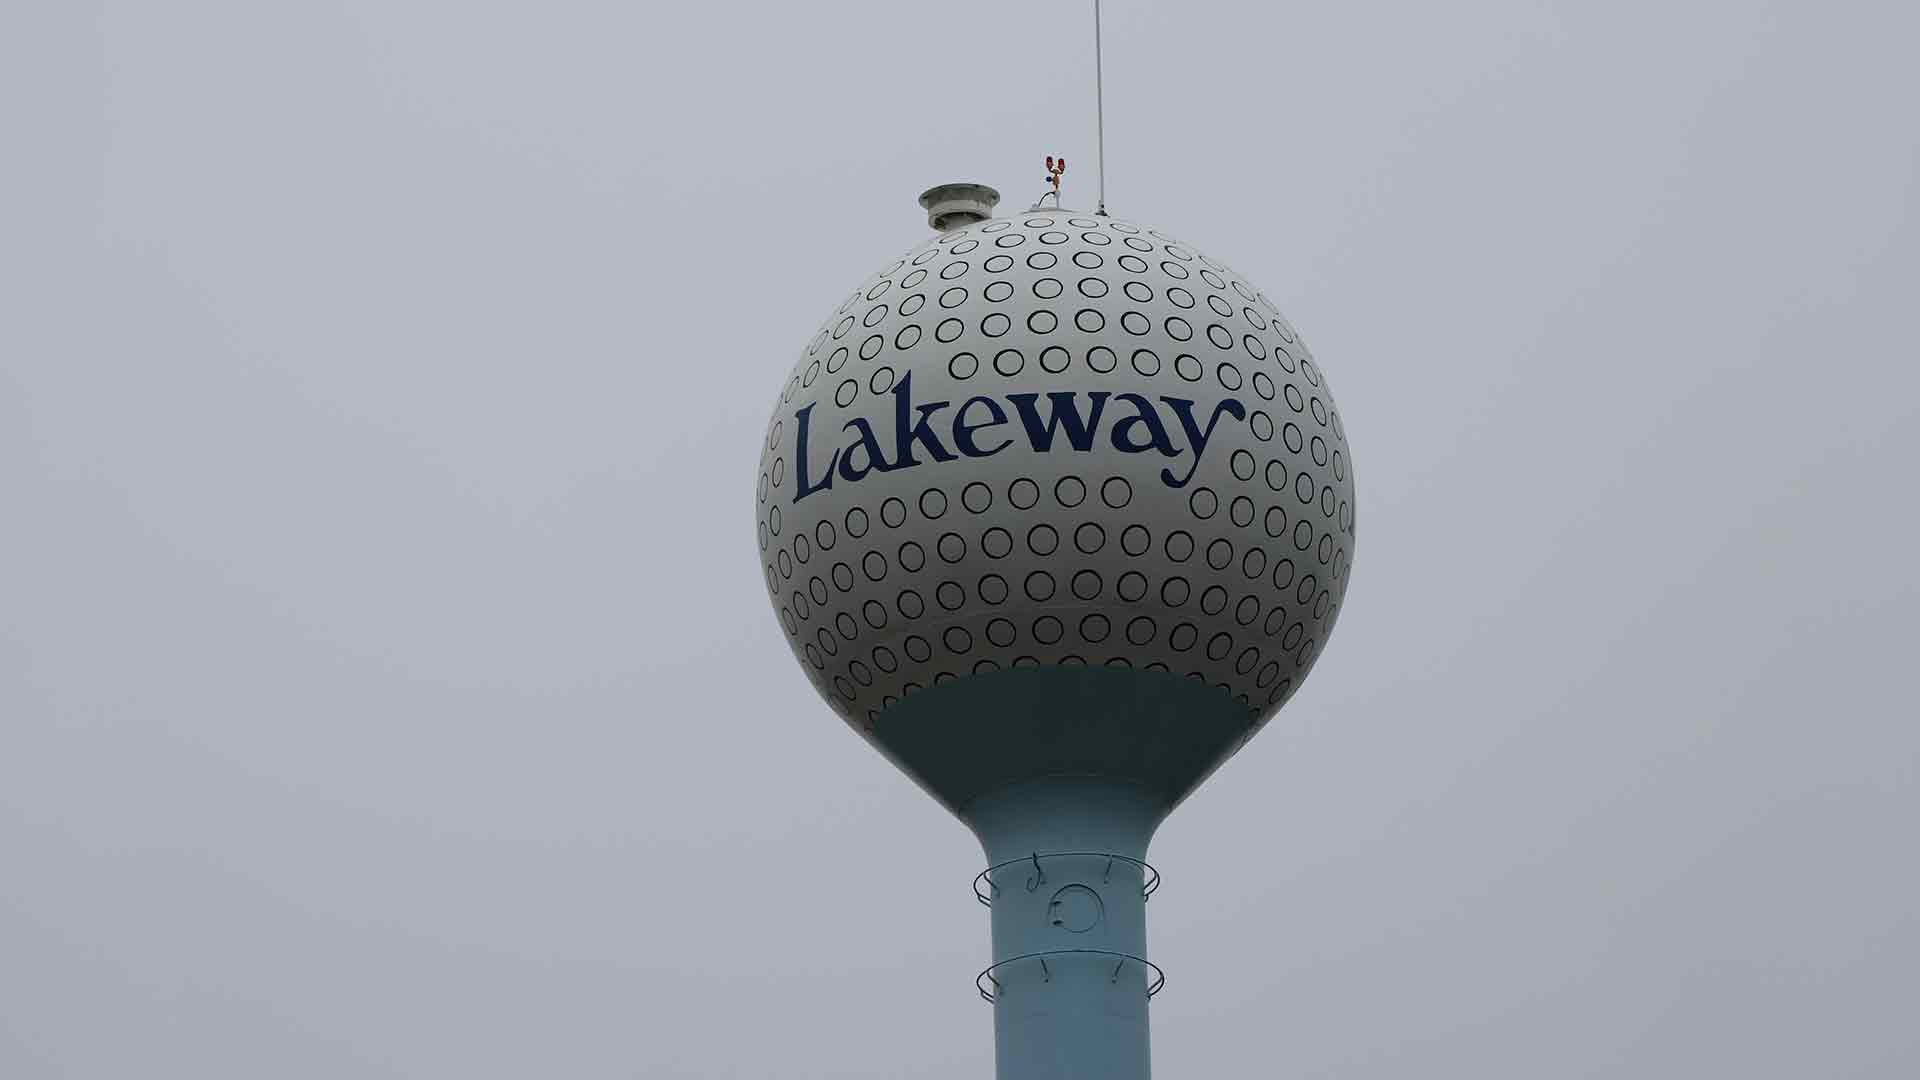 Lakeway, Texas water tower in the distance.